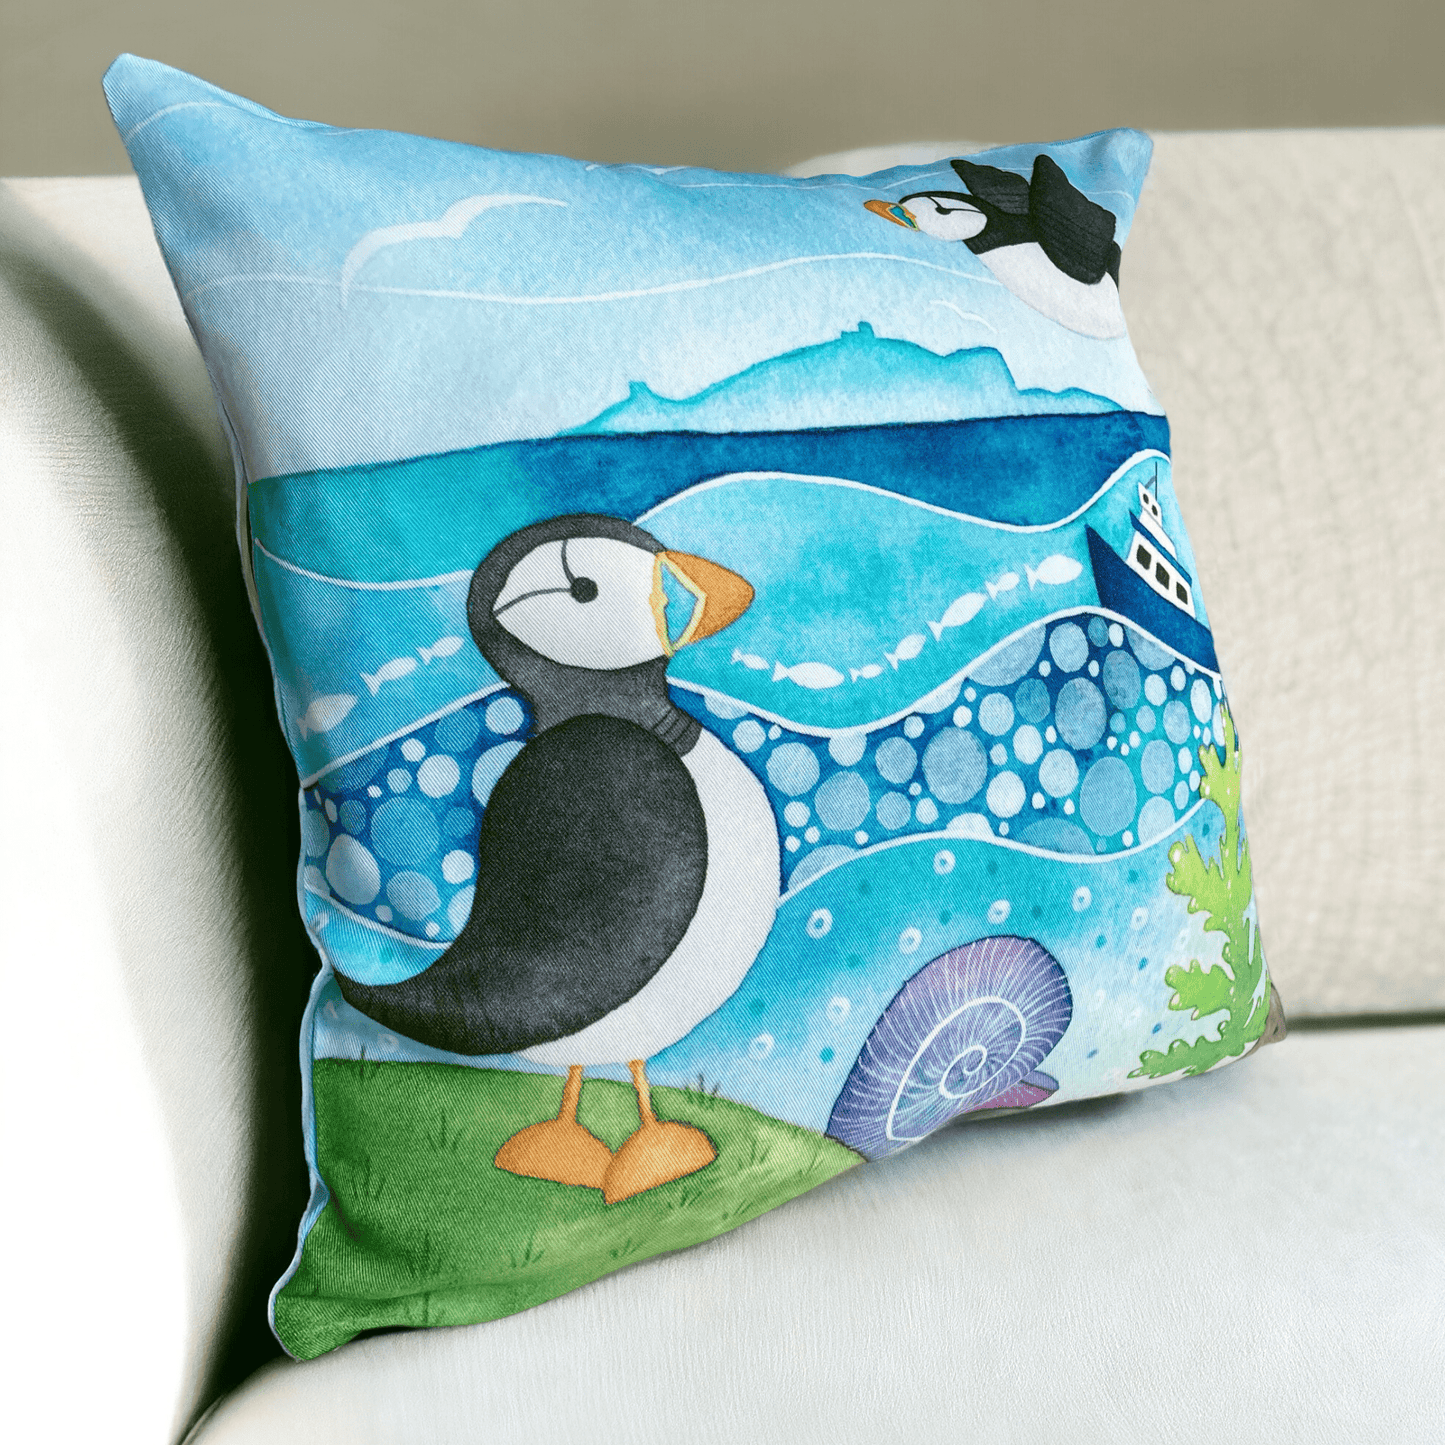 Cushion Cover - Puffins and the Isle of May - Seaside Watercolours - East Neuk Beach Crafts